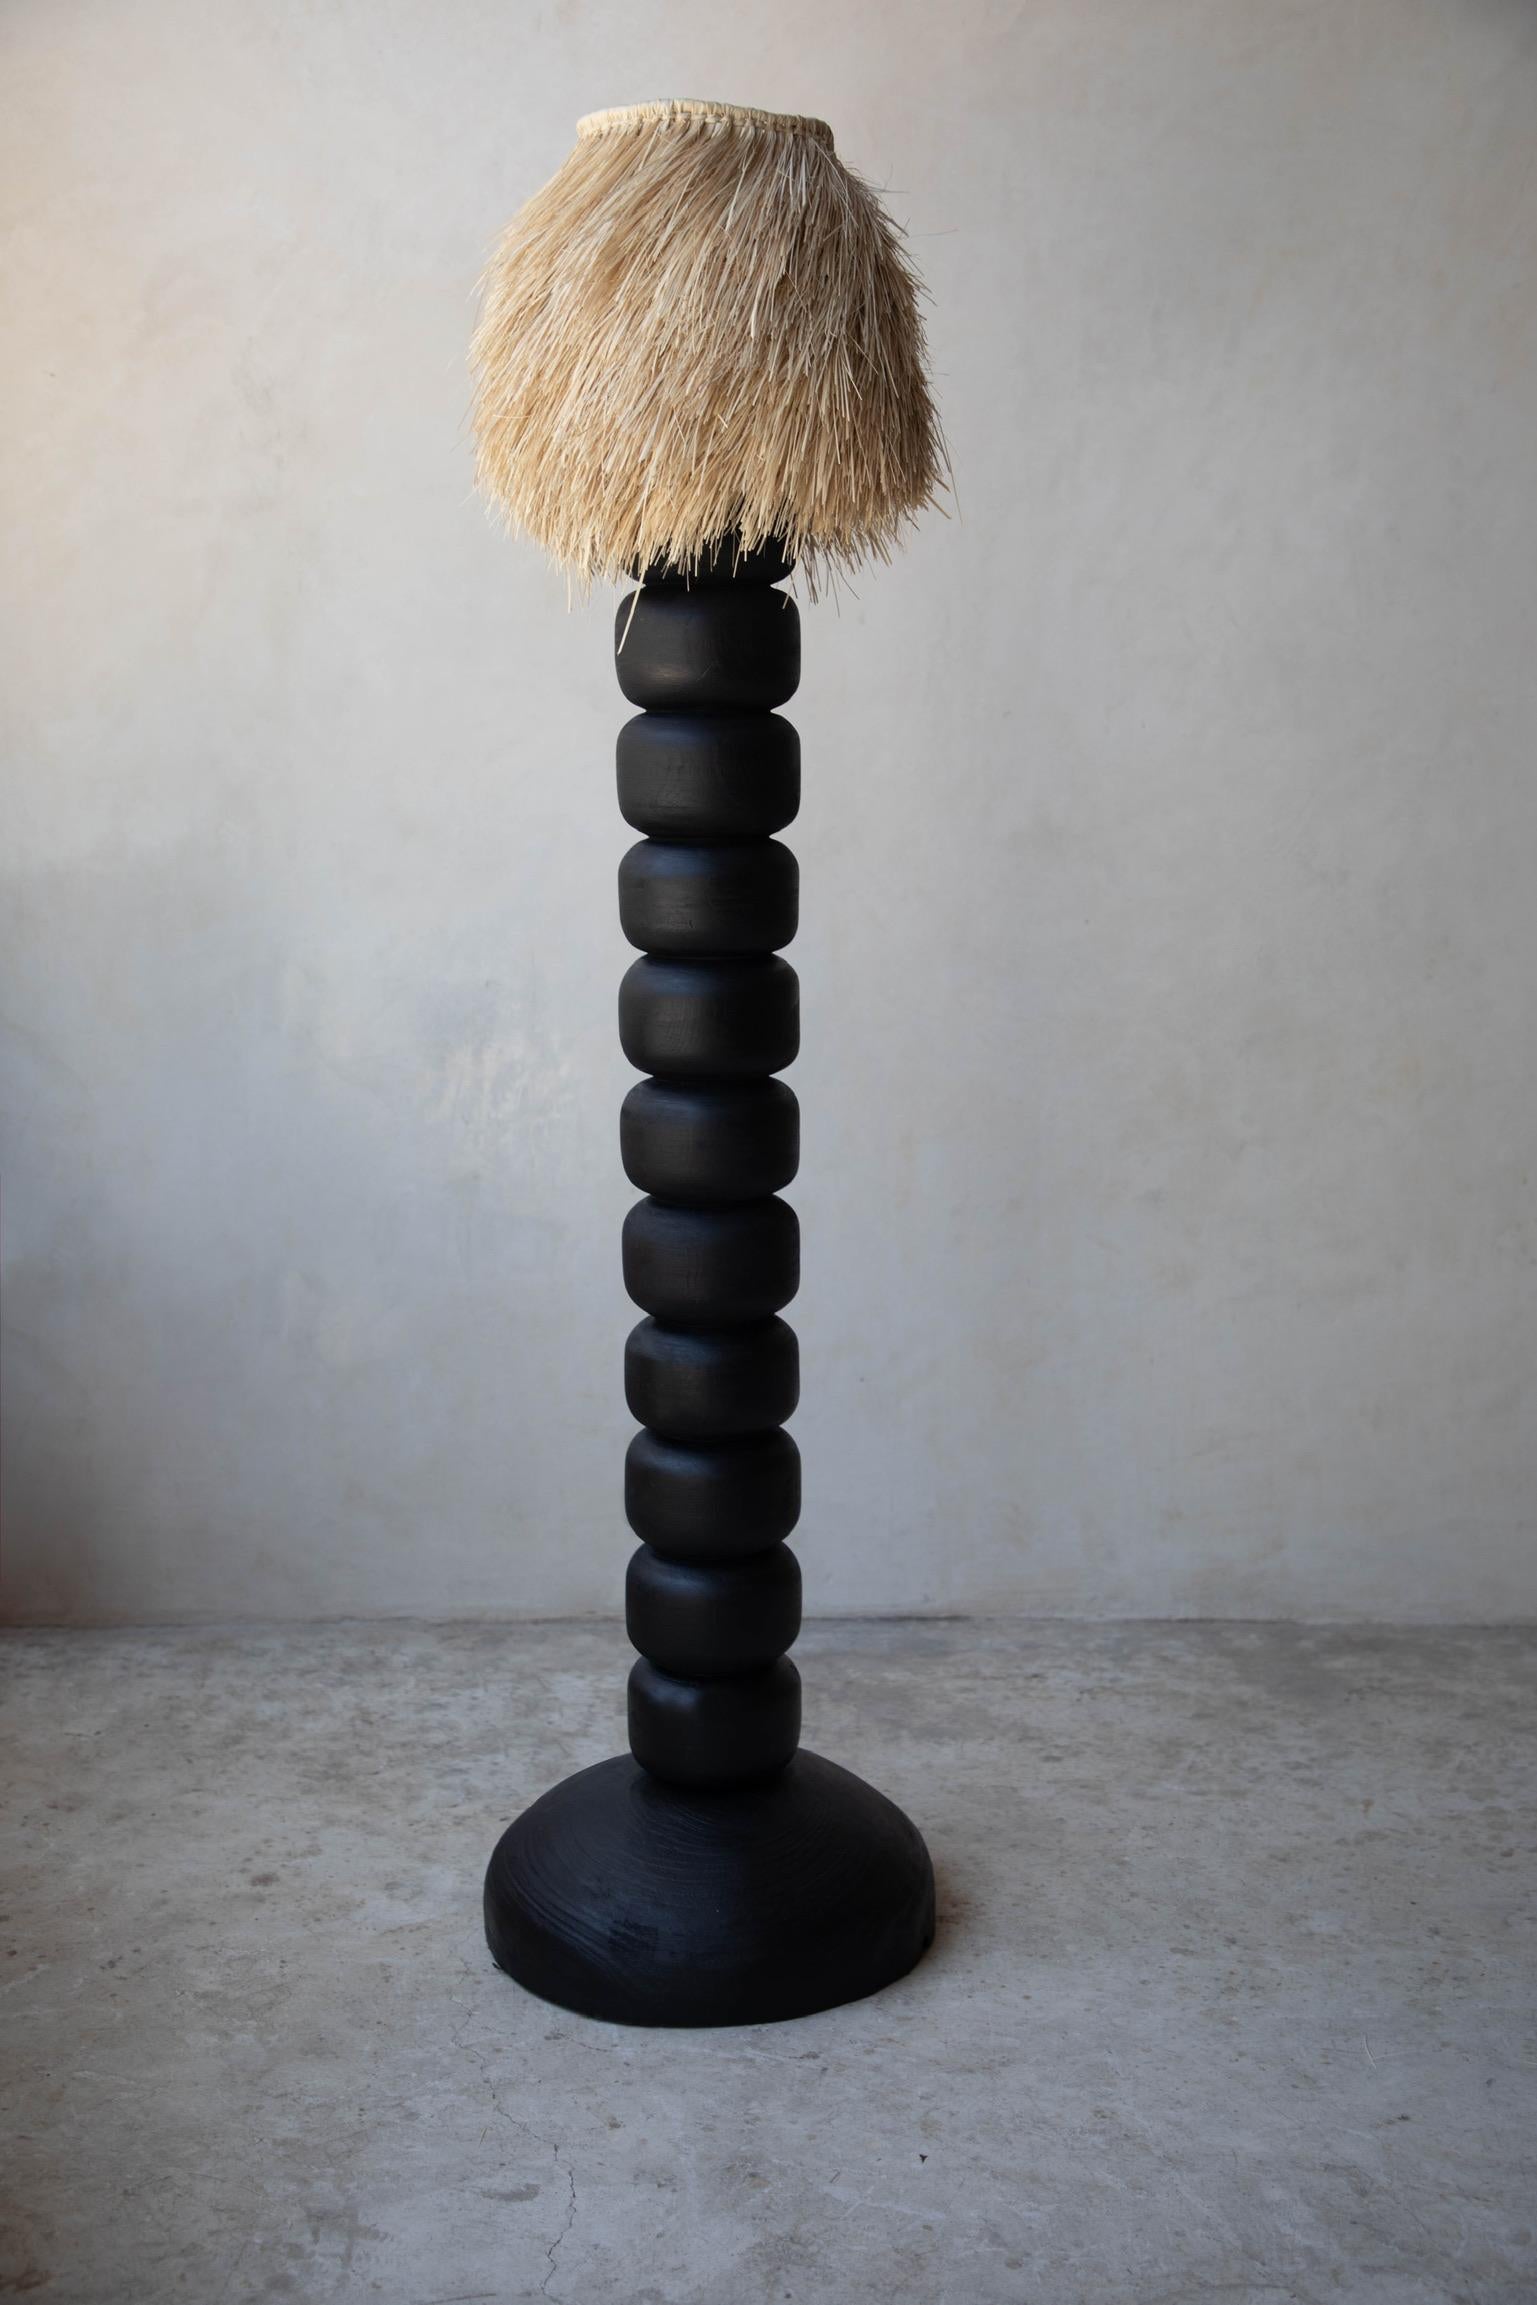 Black jabin wood floor lamp with palm screen by Daniel Orozco.
Material: jabin wood.
Dimensions: D 39.9 x H 159.8 cm.
Available in palm or linen lampshade and in natural or black wood finish.
Available in 2 sizes: D 30 x H 110, D 40 x H 160